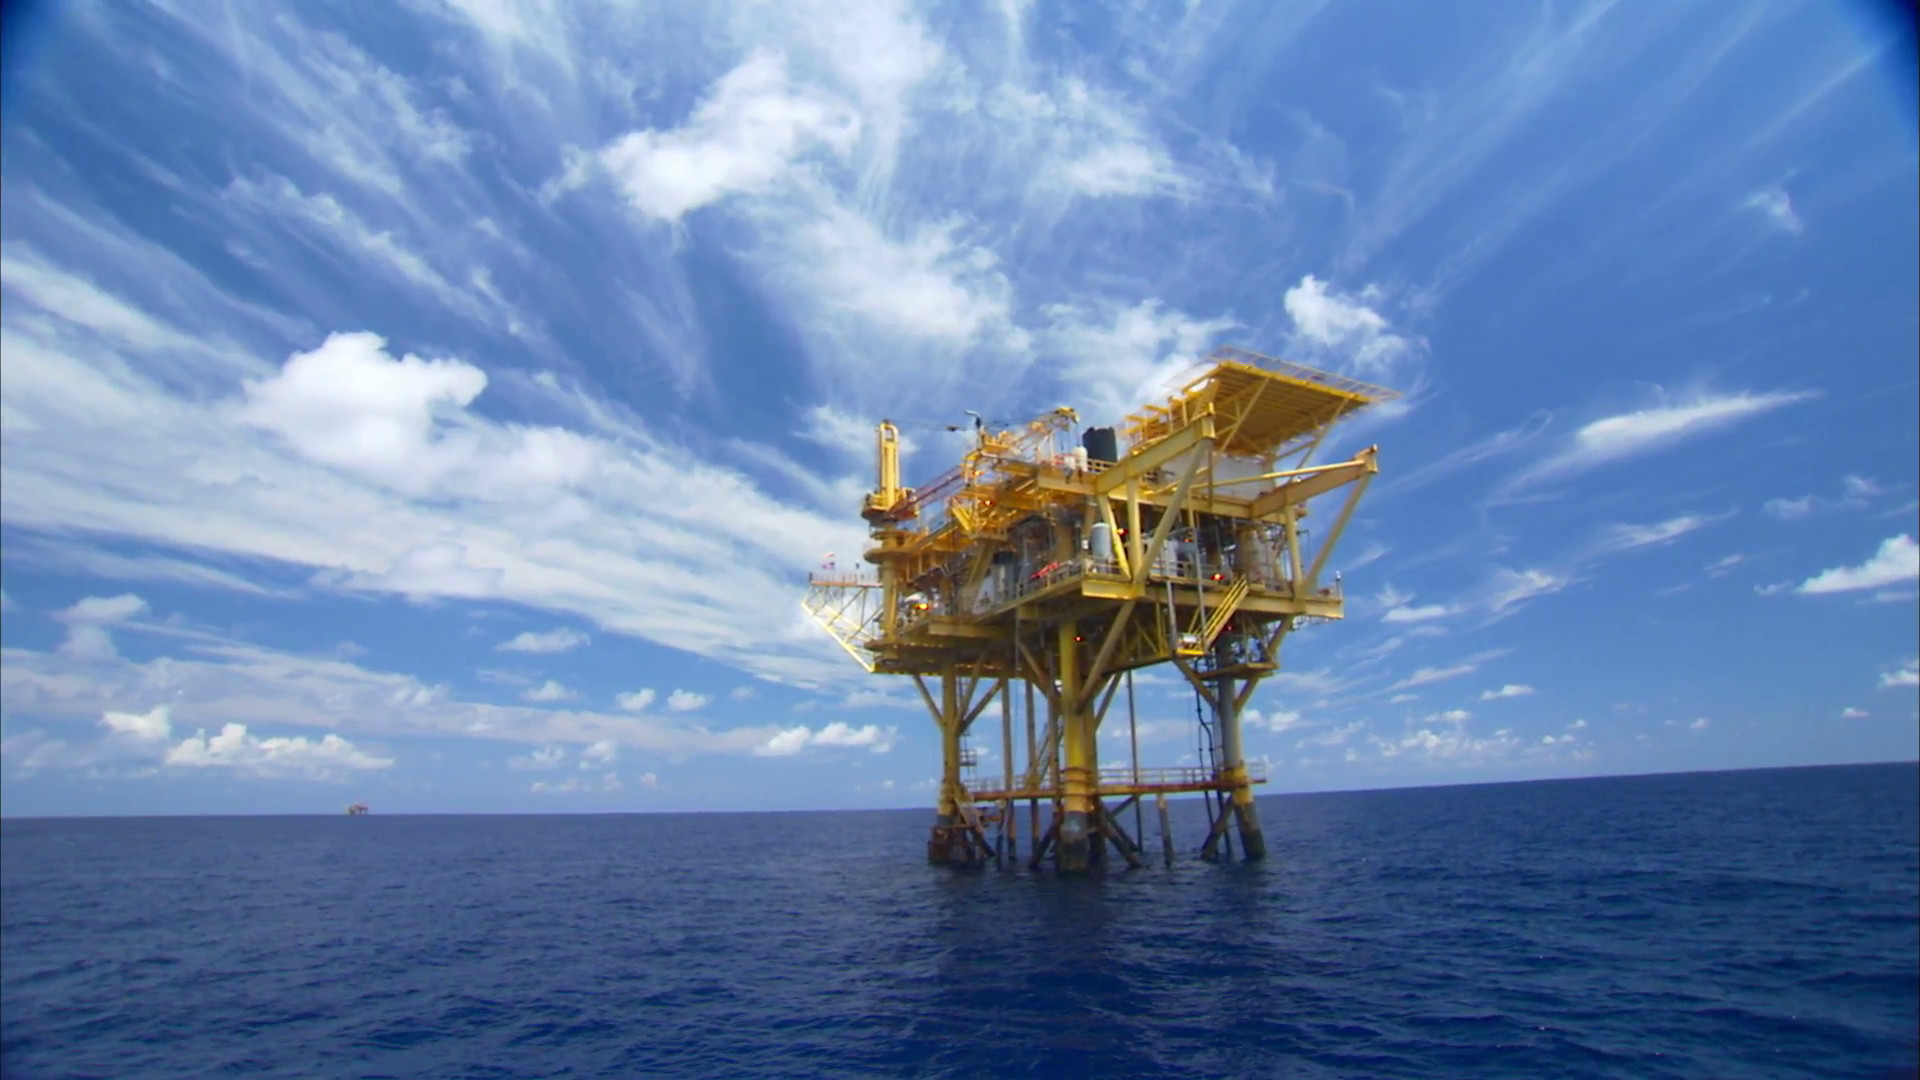 oil rig wallpaper,oil rig,offshore drilling,semi submersible,vehicle,drilling rig